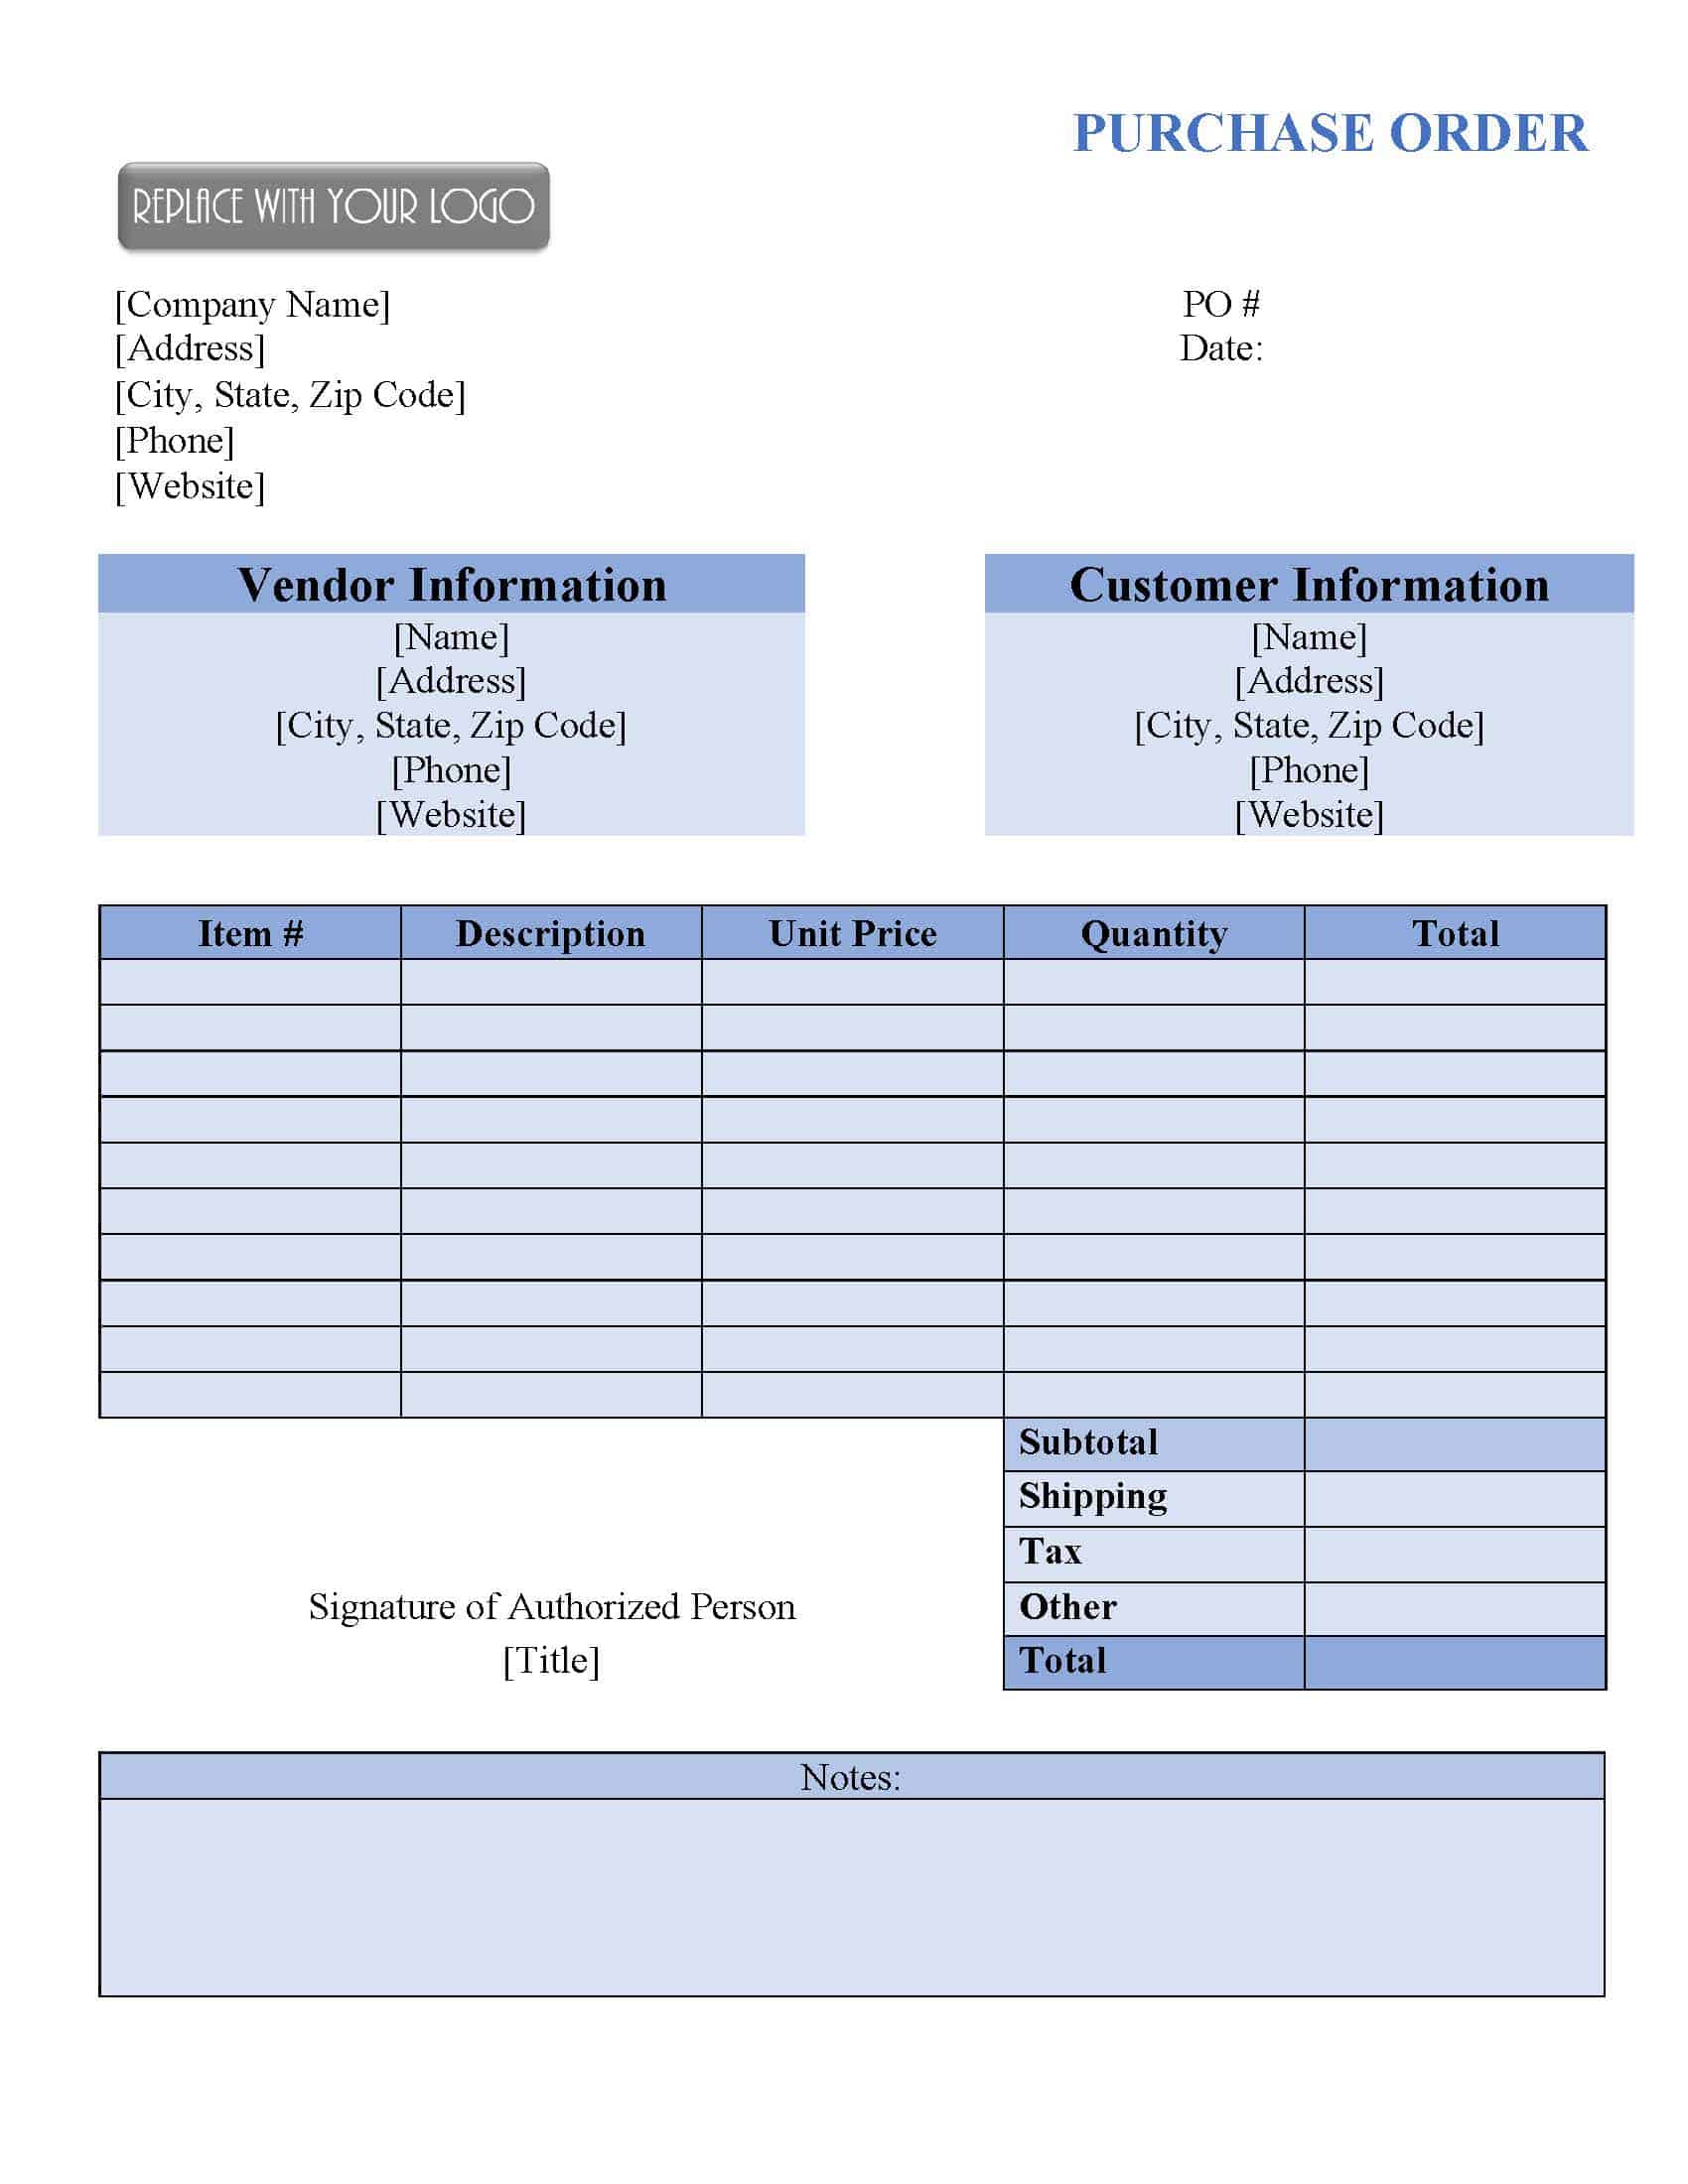 FREE Purchase Order Template | Instant Download